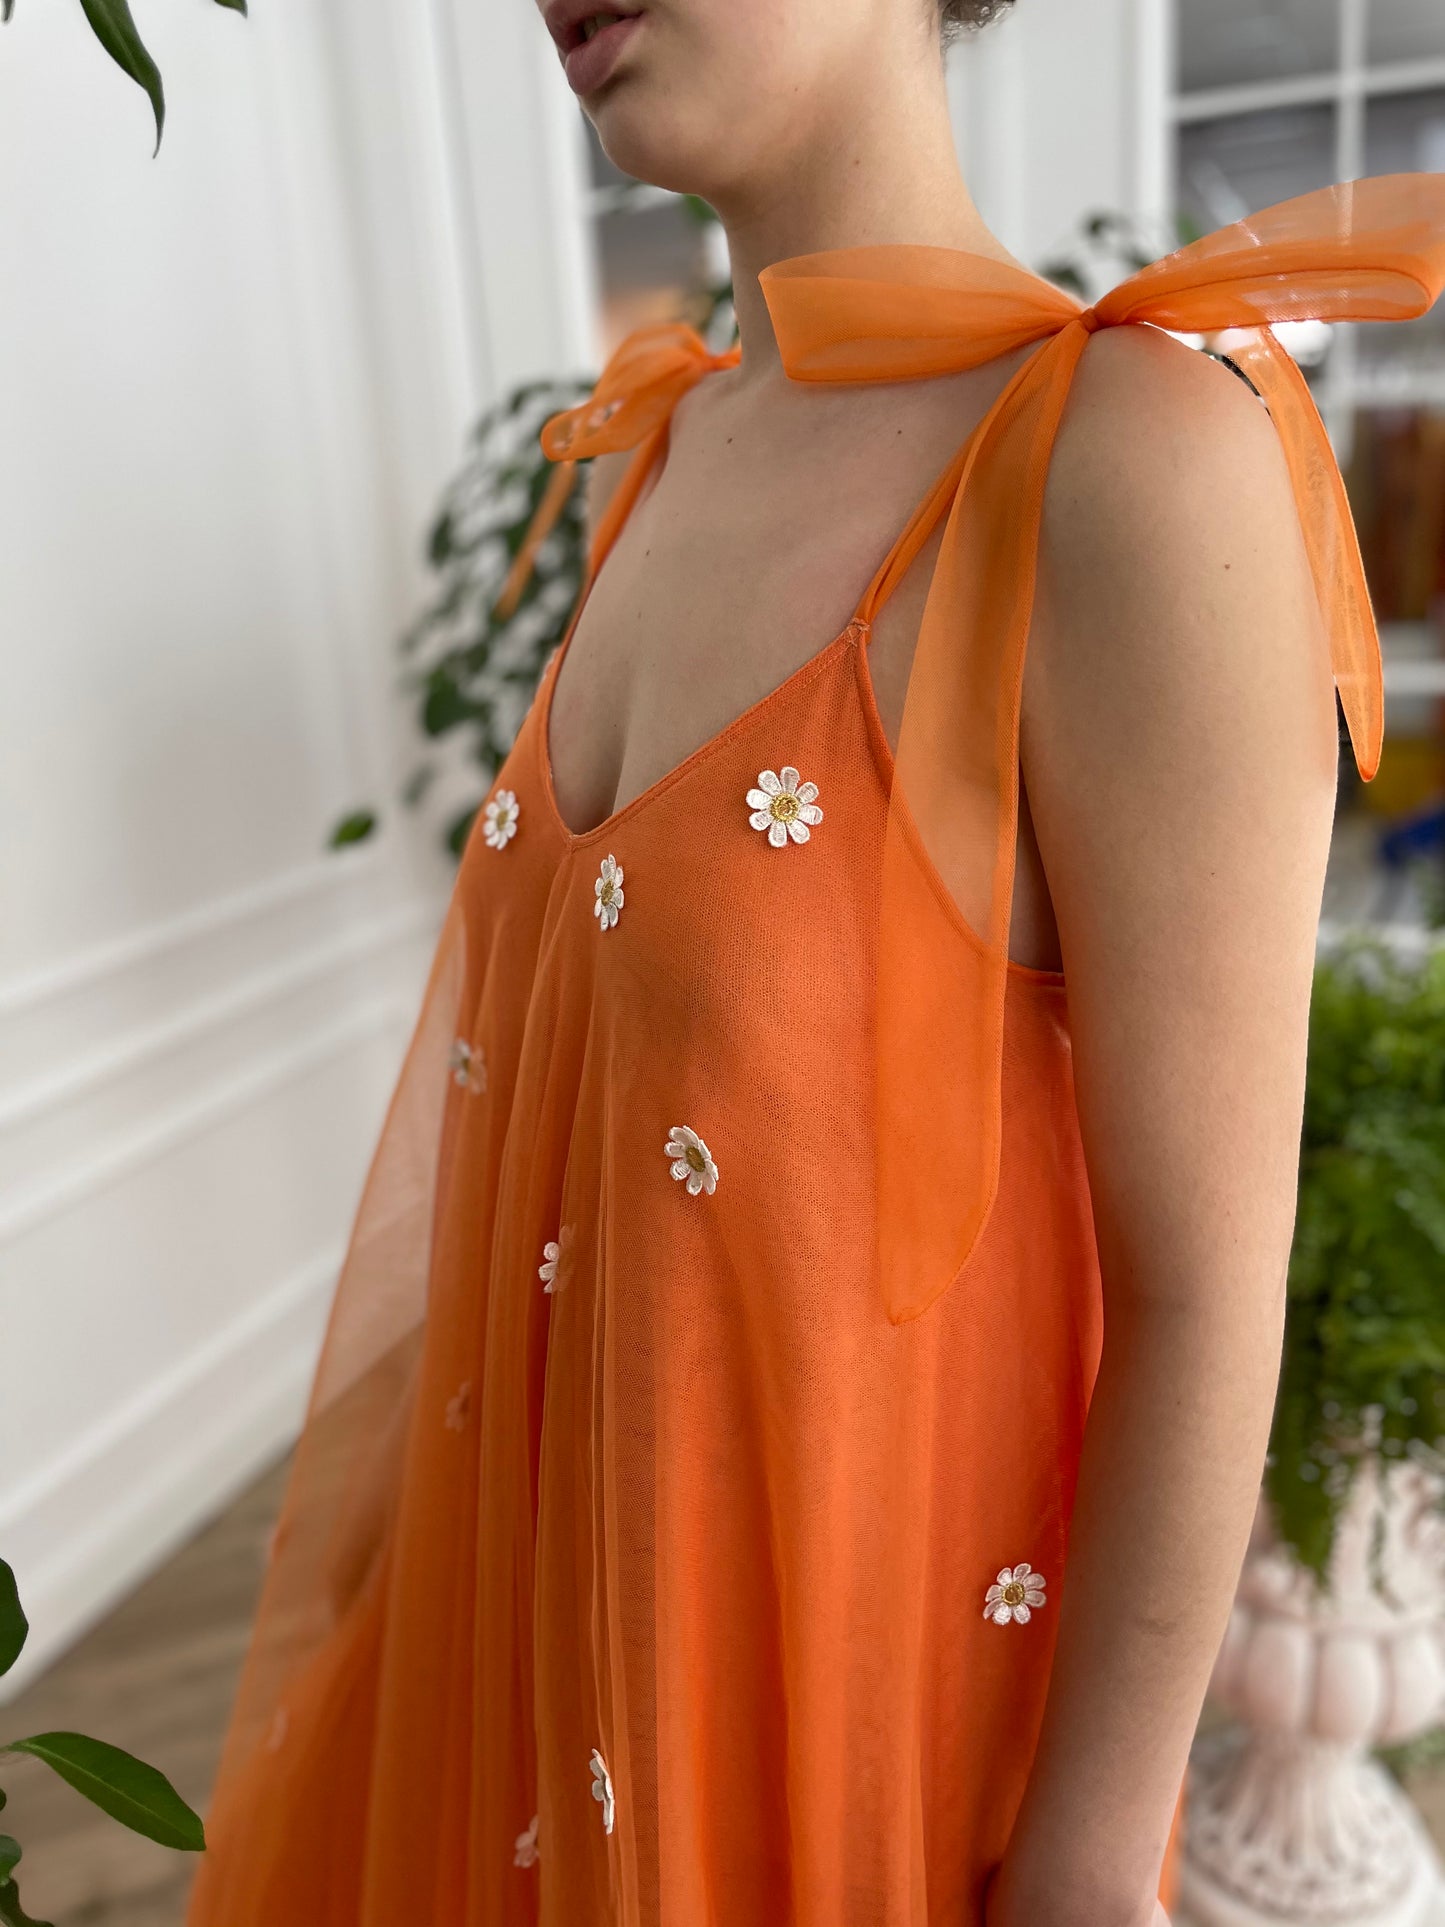 Orange sheath dress with embroidered daisies and bow straps